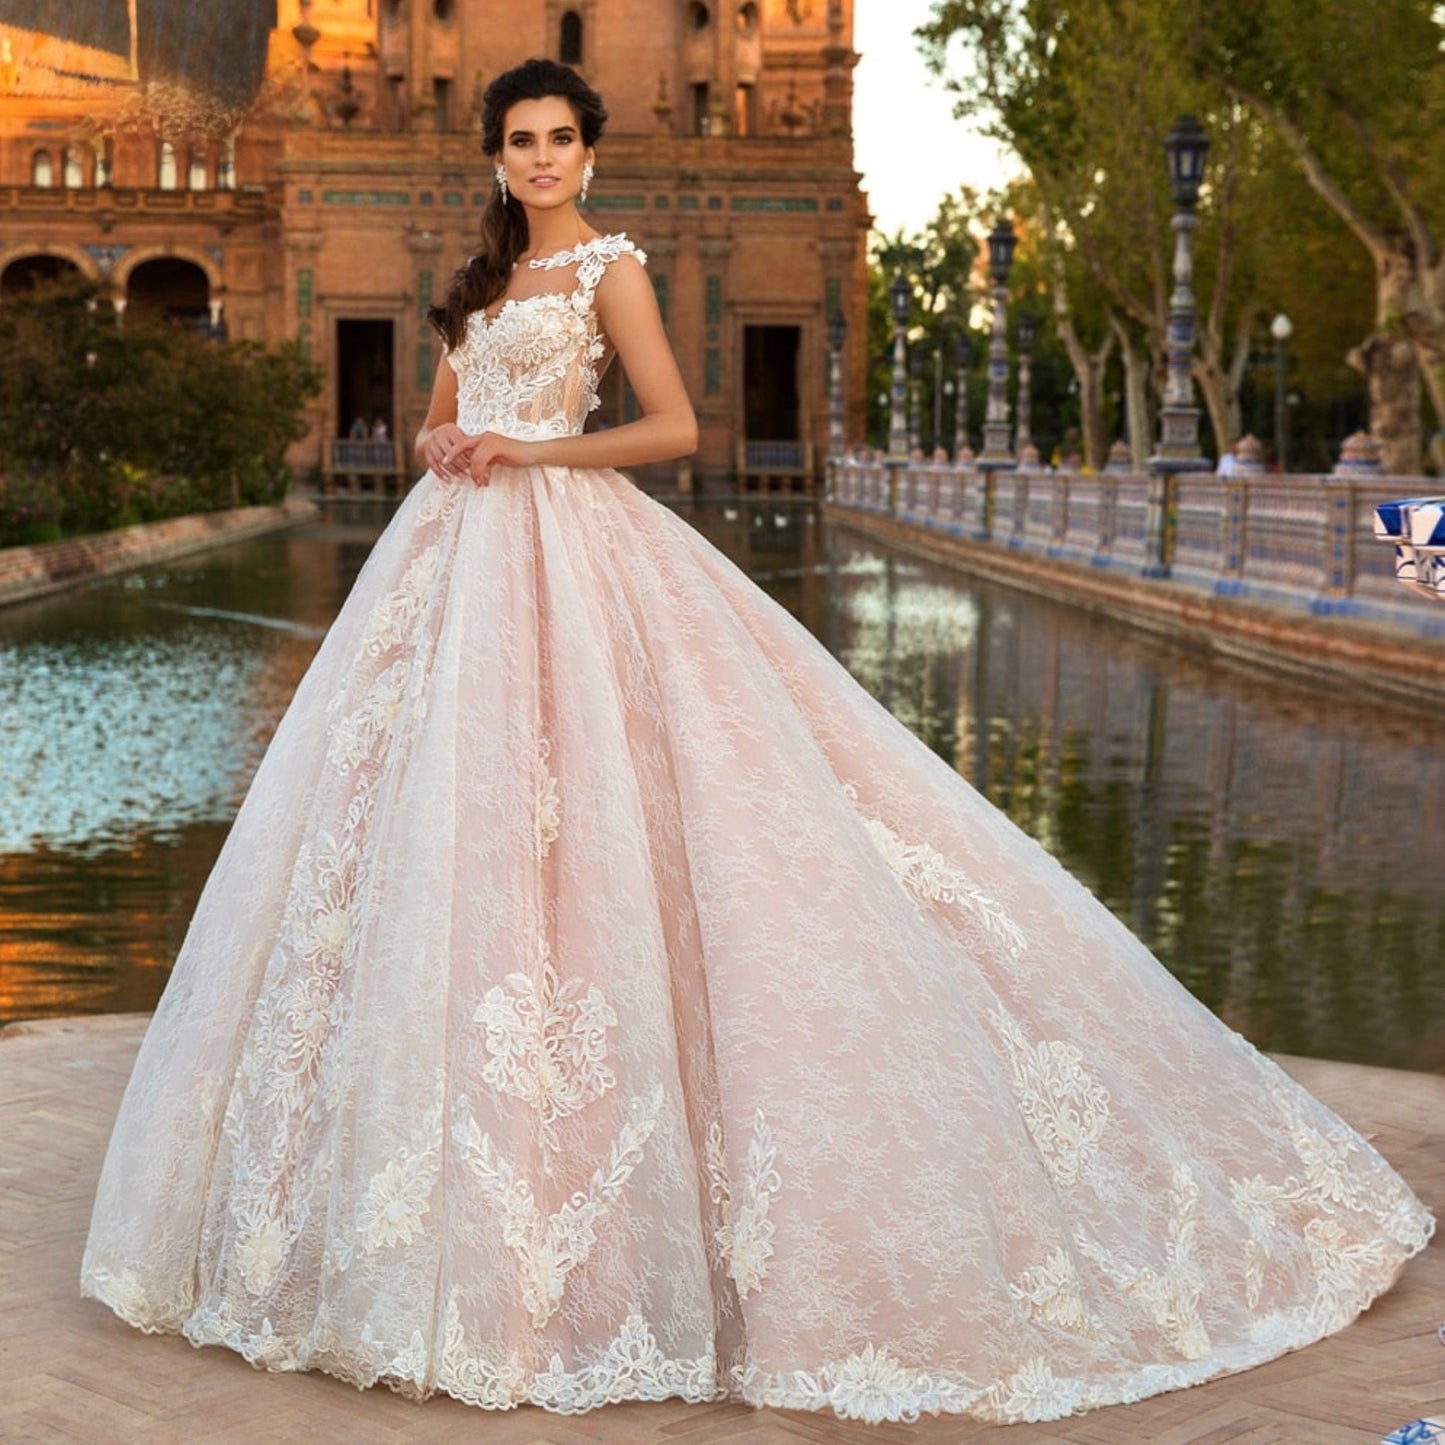 Load image into Gallery viewer, Luxurious Illusion Lace A-Line Wedding Bridal Ball Gown
